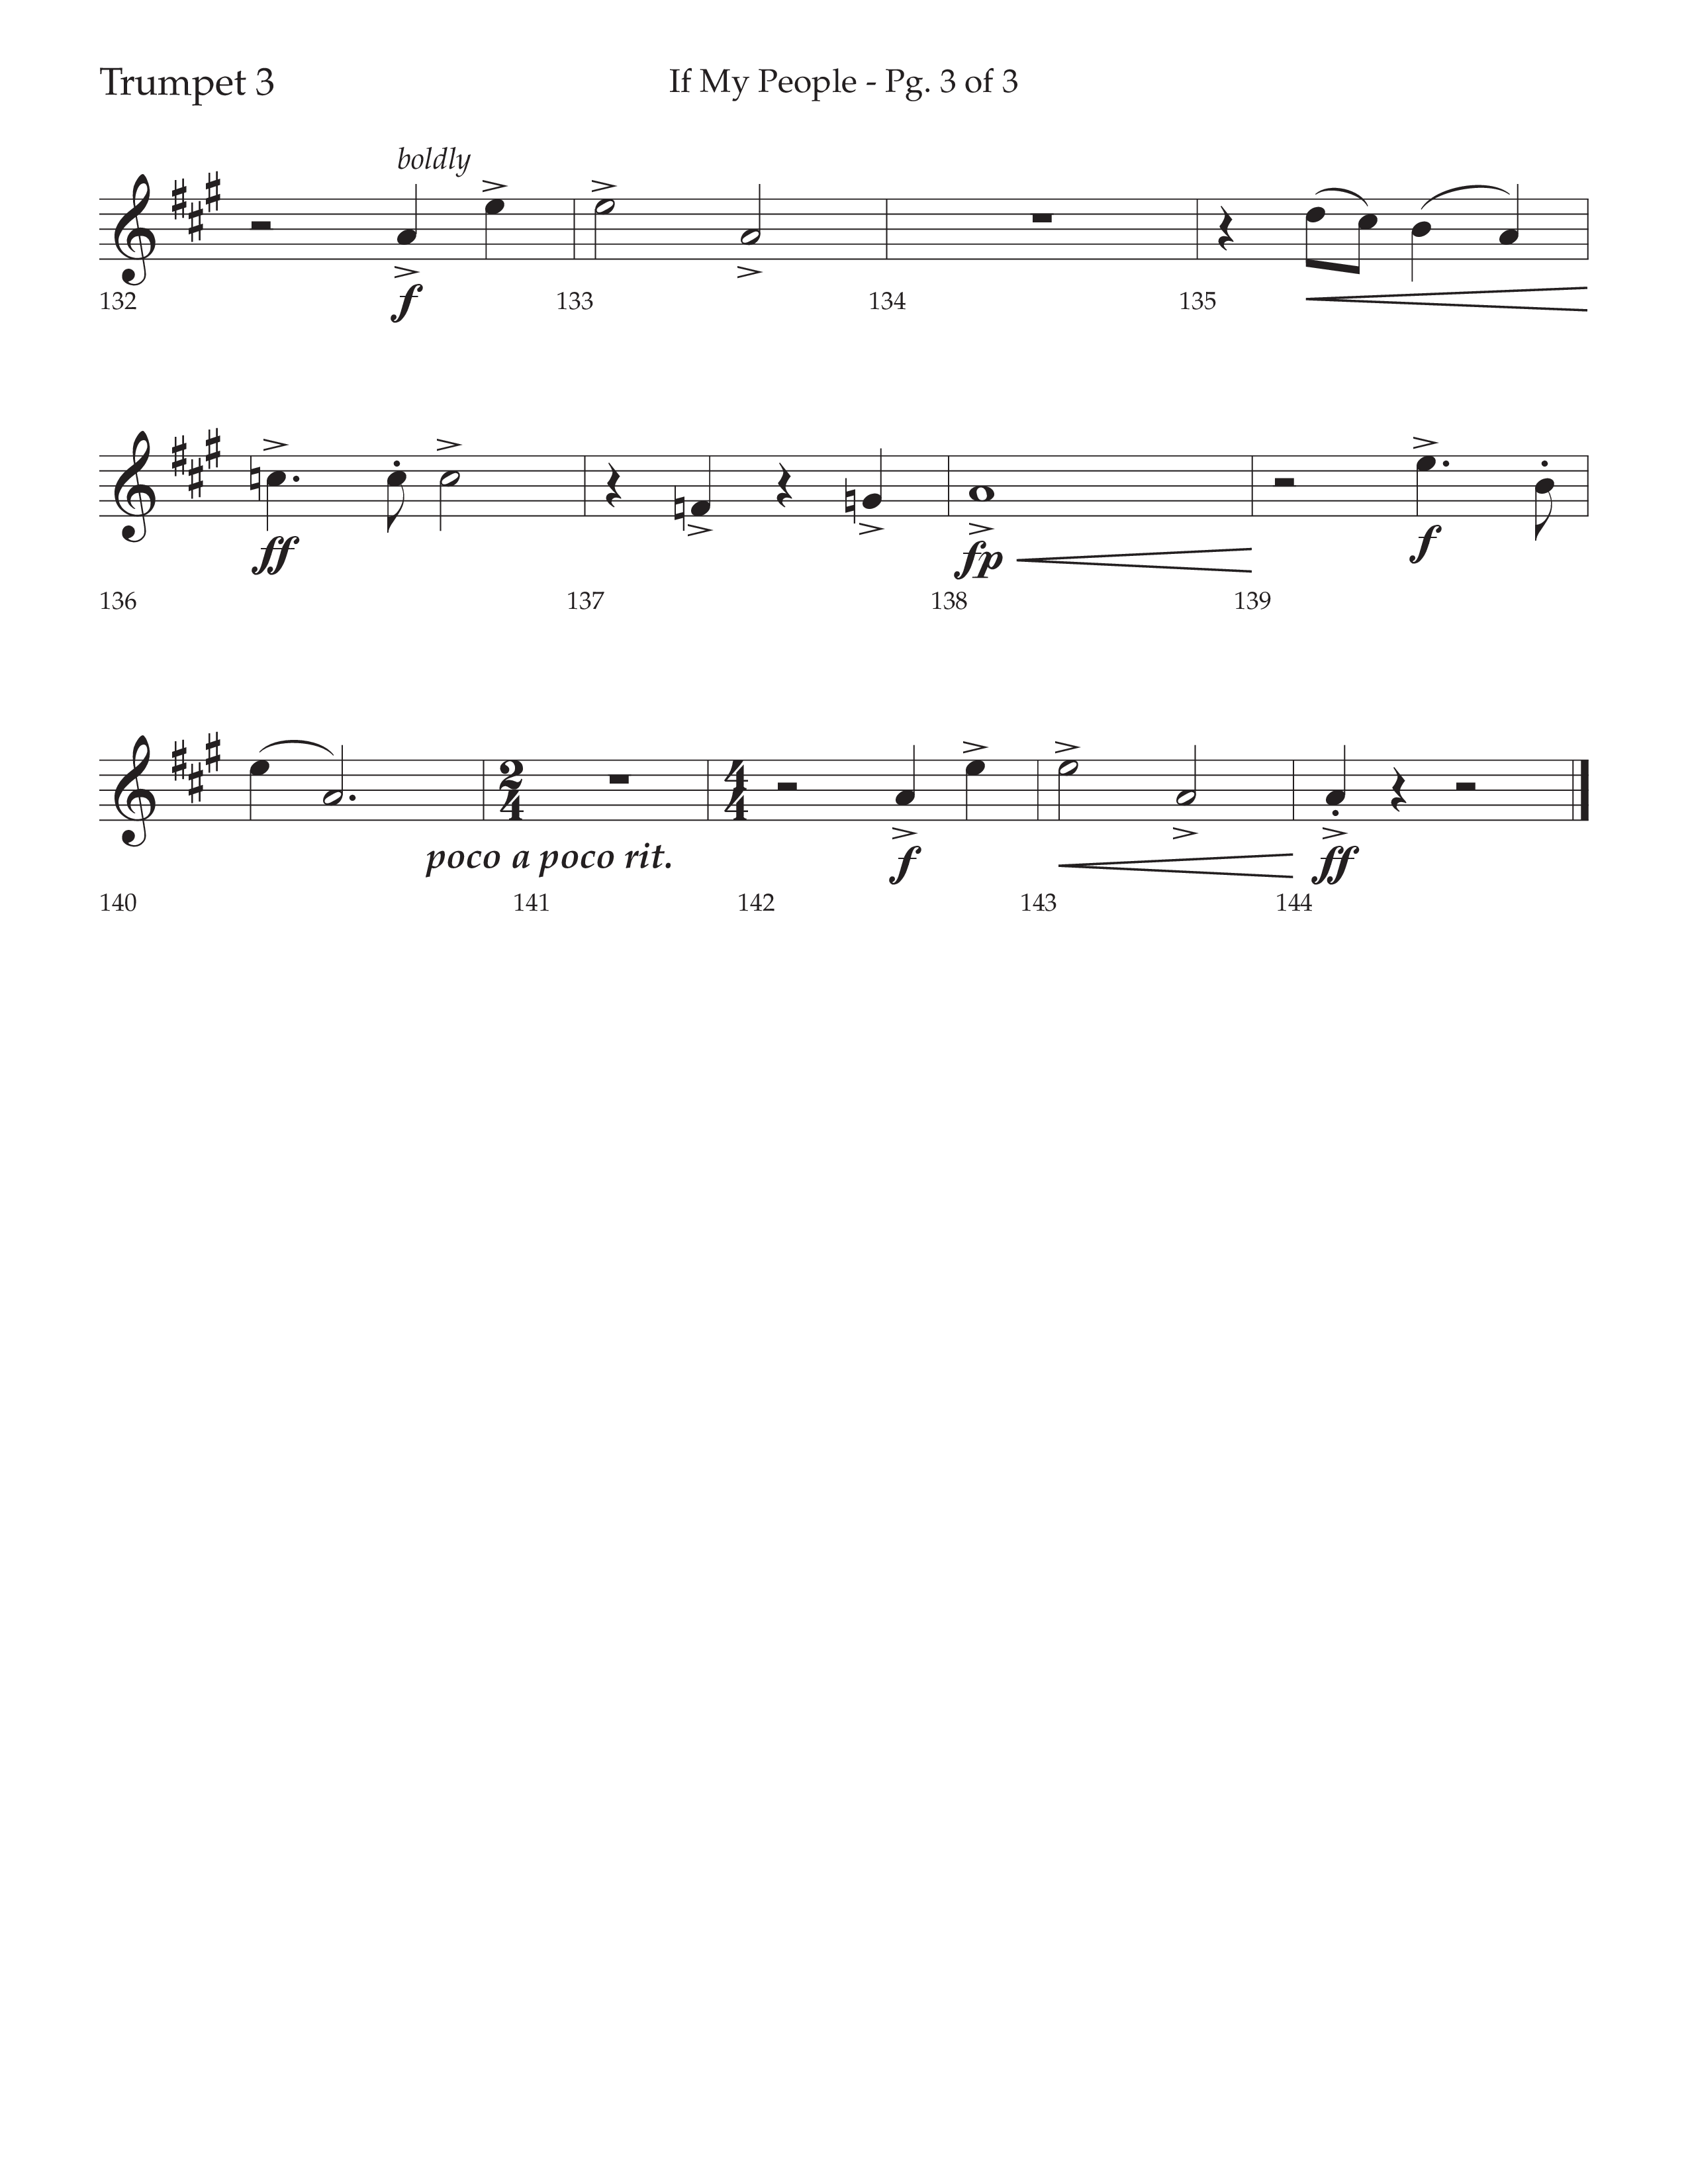 If My People (Choral Anthem SATB) Trumpet 3 (Lifeway Choral / Arr. David Wise / Orch. David Shipps)